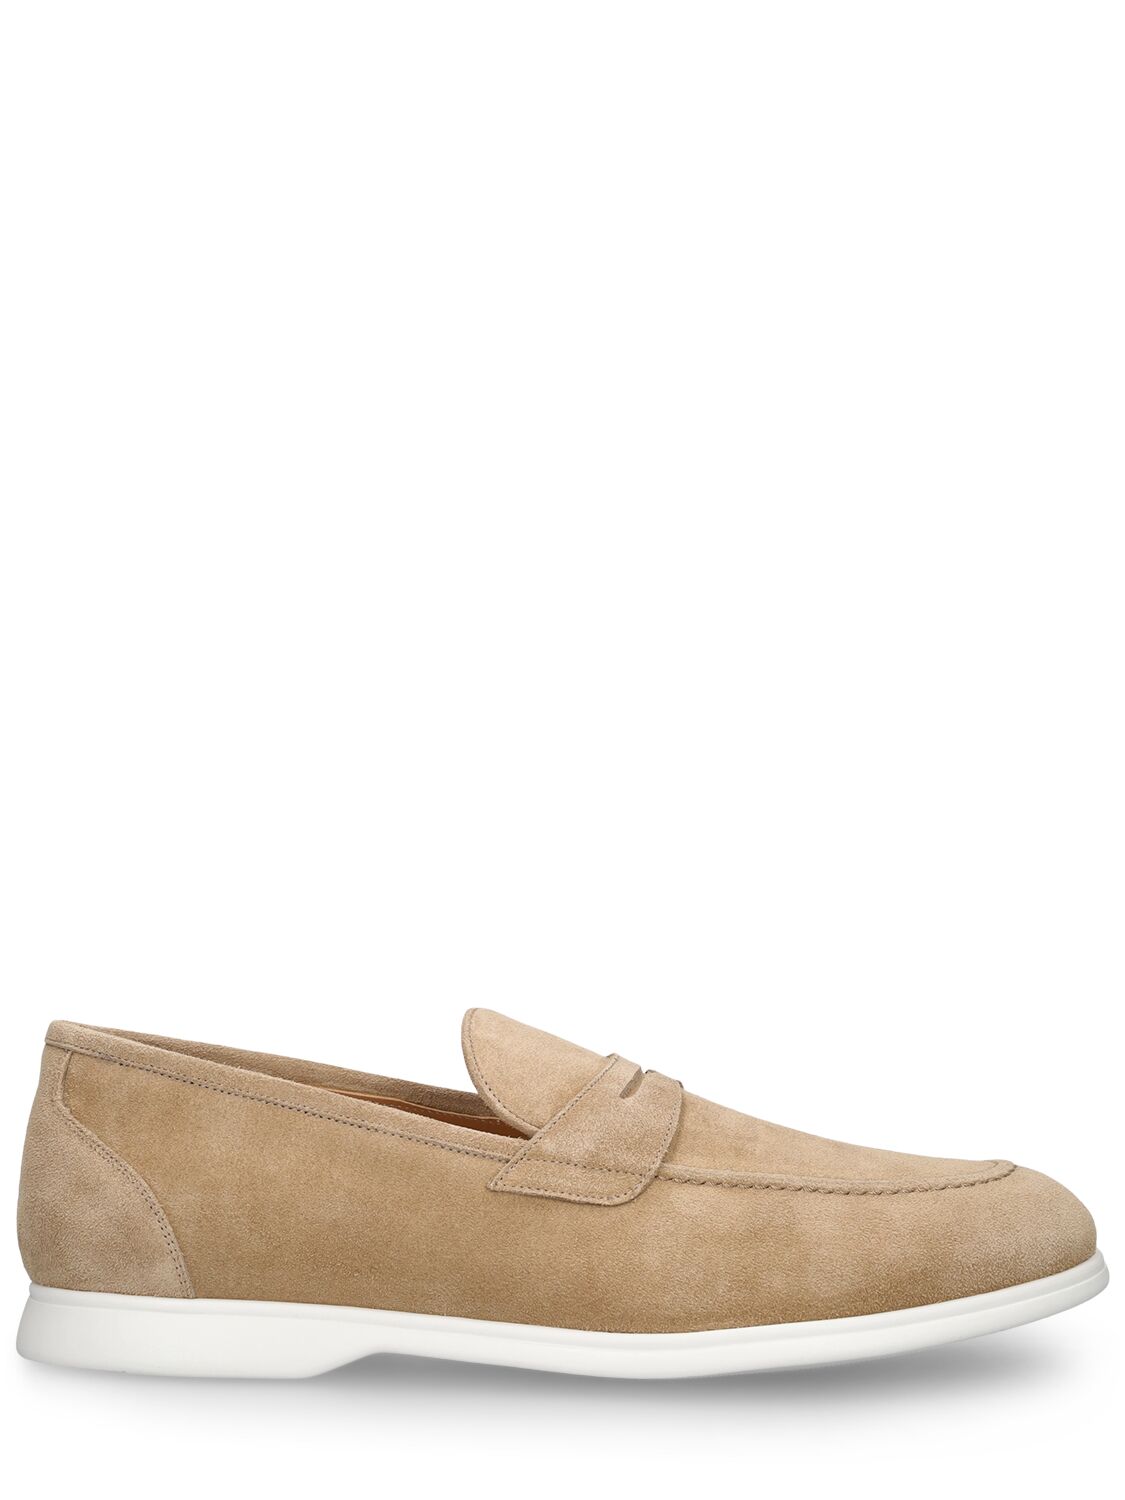 Kiton Suede White Sole Loafers In Sand